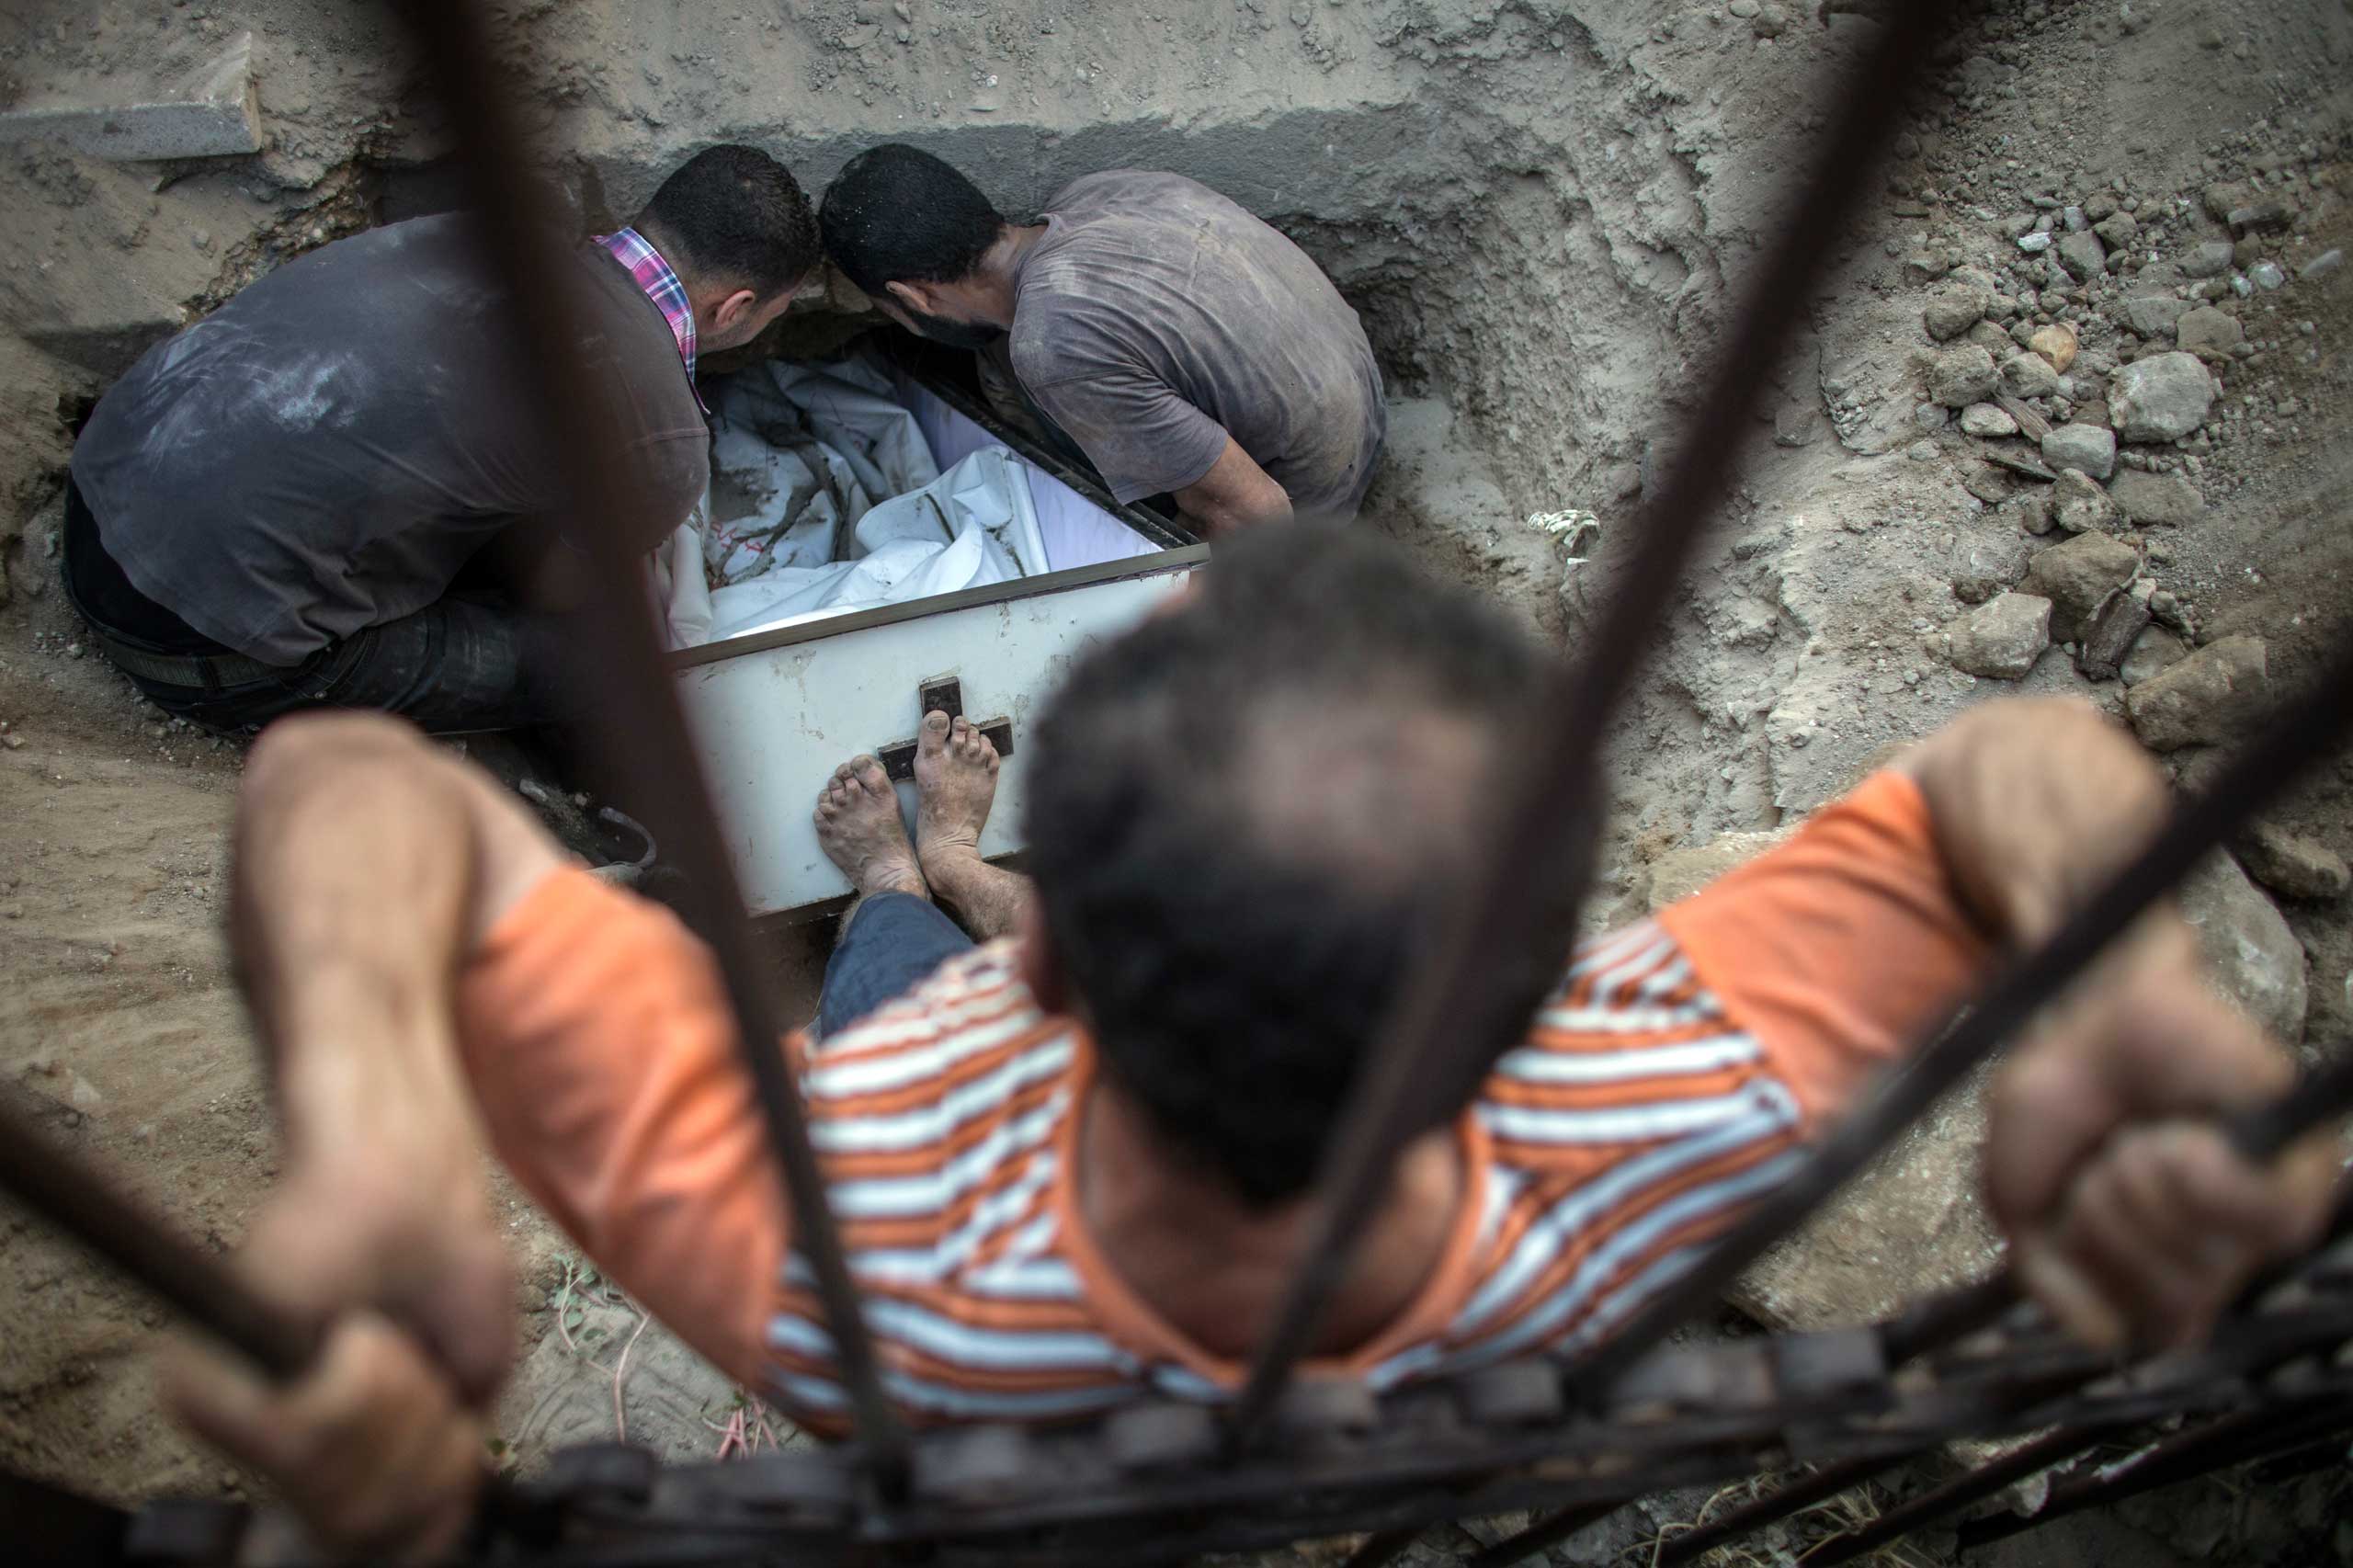 A Palestinian Christian man from Gaza tries to push the coffin of Jalila in a grave during her funeral on the small and overcrowded cemetery of the St. Porfirius Church, Gaza City, July 27, 2014.